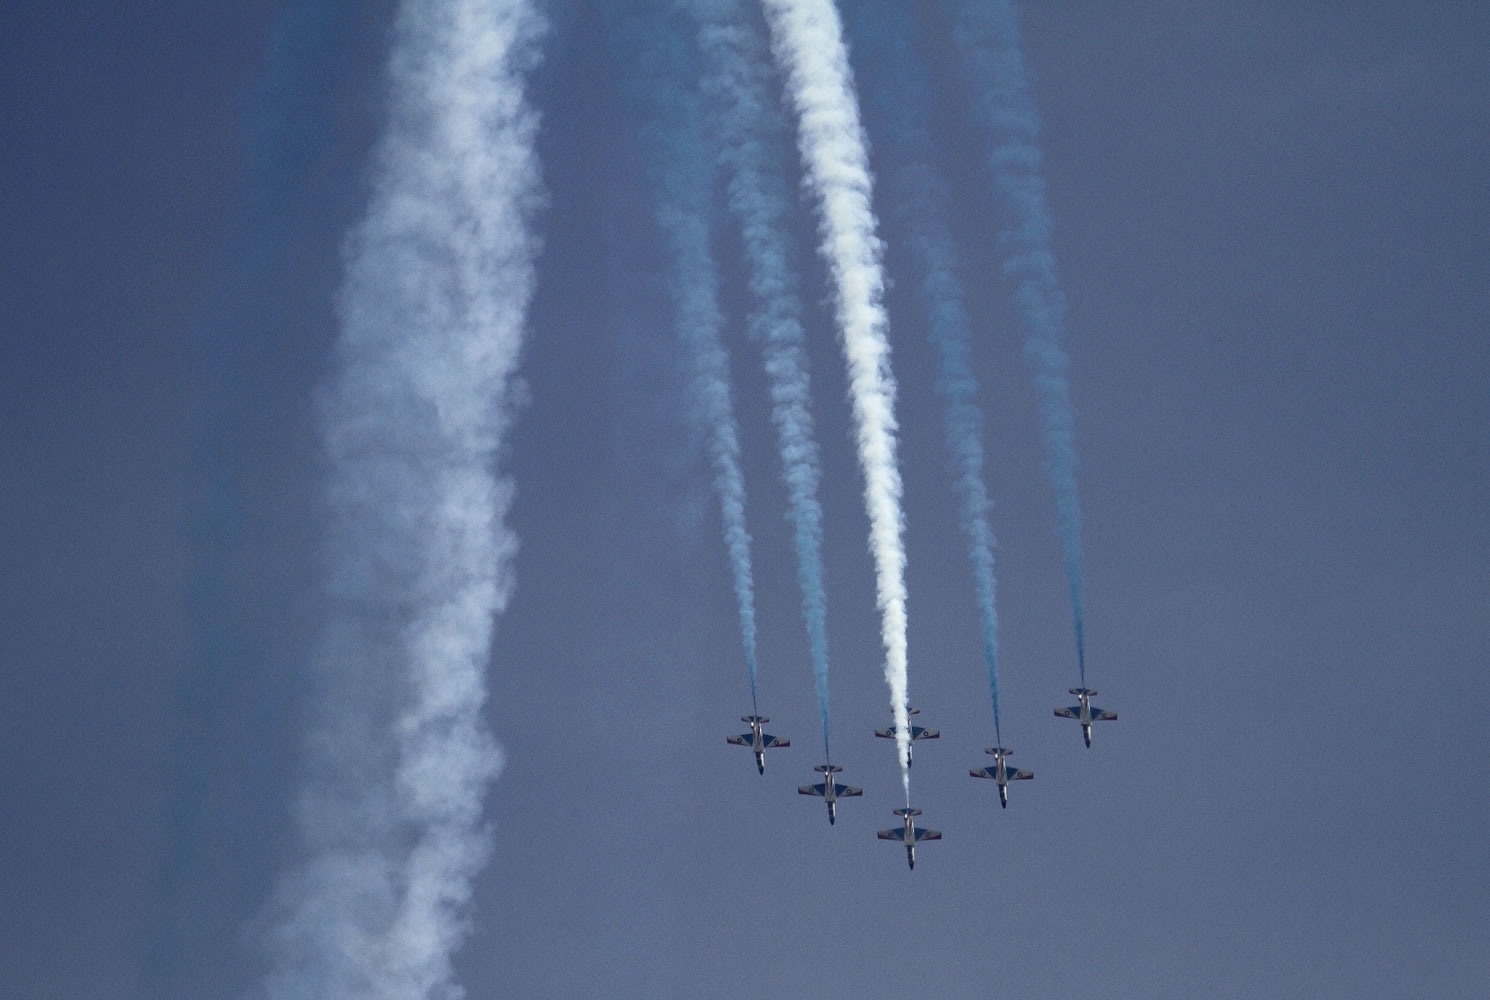 Pakistan Air Force fighter jets demonstrate an aerobatic performance during the Pakistan National Day parade in Islamabad, Pakistan, on Monday.